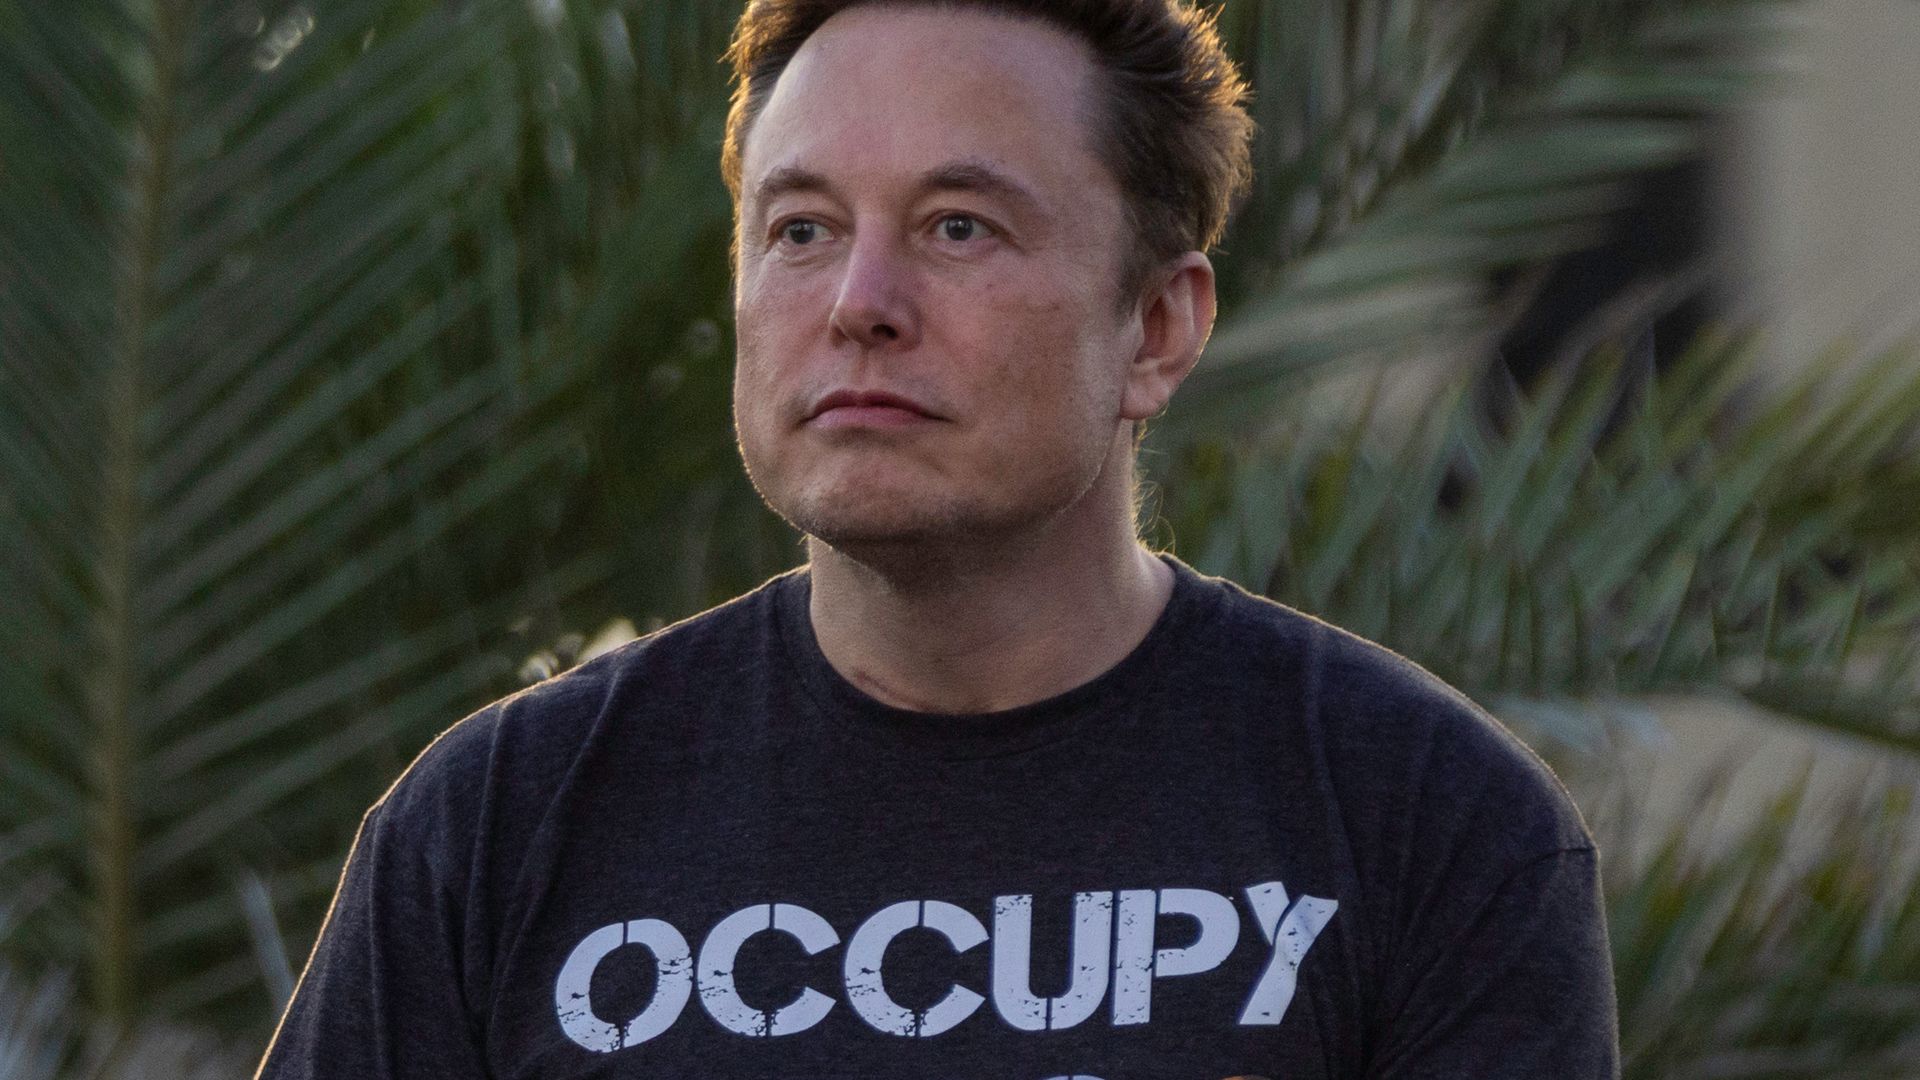 SpaceX founder Elon Musk during a T-Mobile and SpaceX joint event